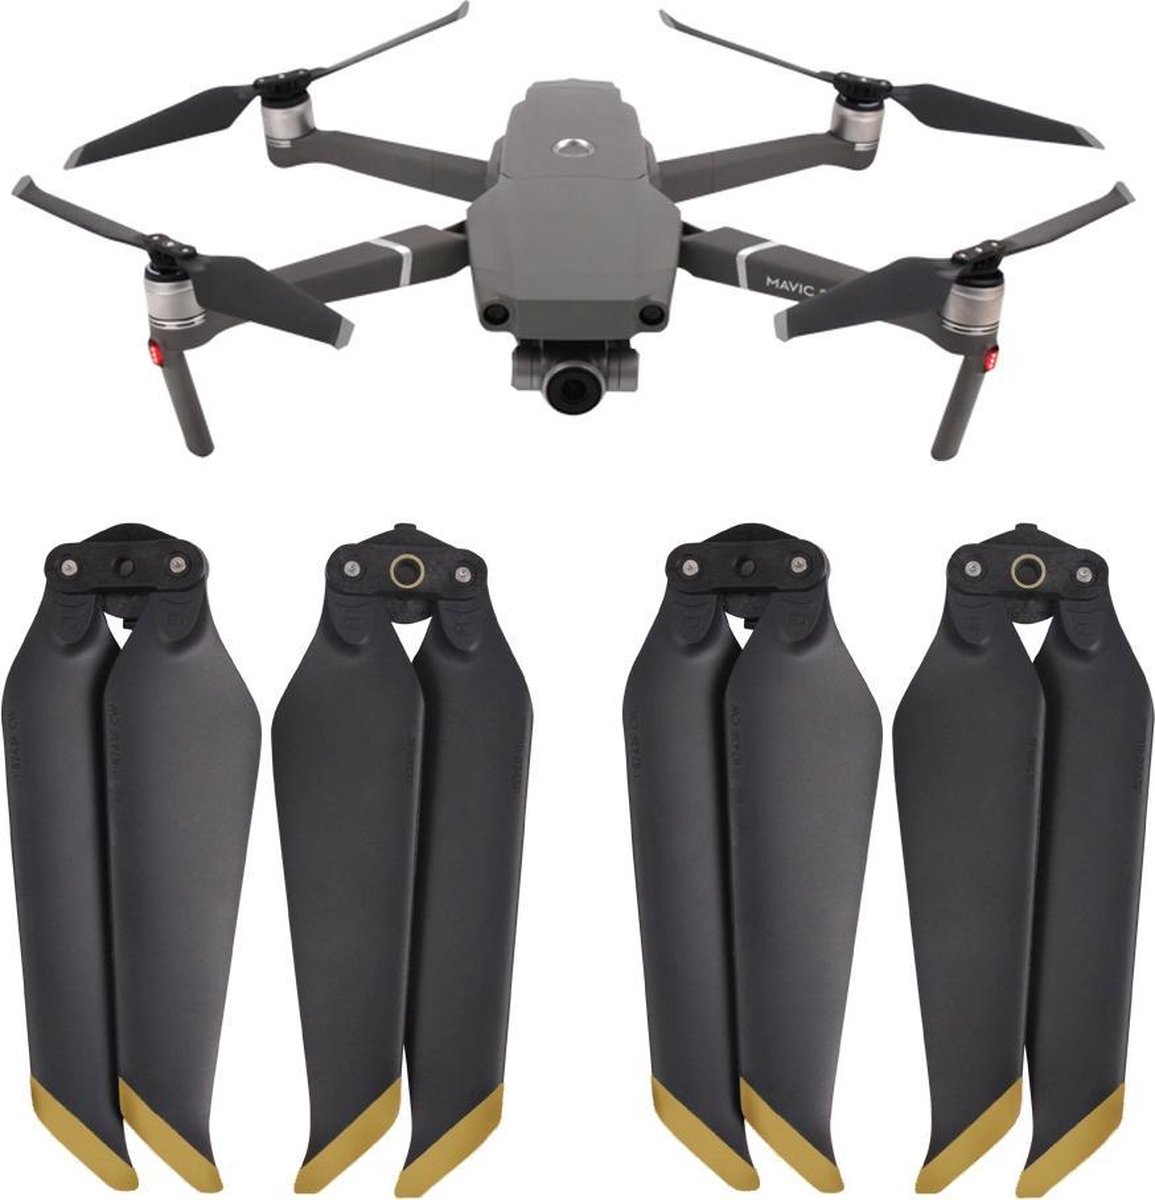 8743F Low-Noise Quick-Release Propellers Genuine Props Blades for DJI Mavic 2 Pro/Mavic Zoom Drone Accessories Flight Wings TM For DJI Mavic 2 Propellers 2 Pairs Y56 